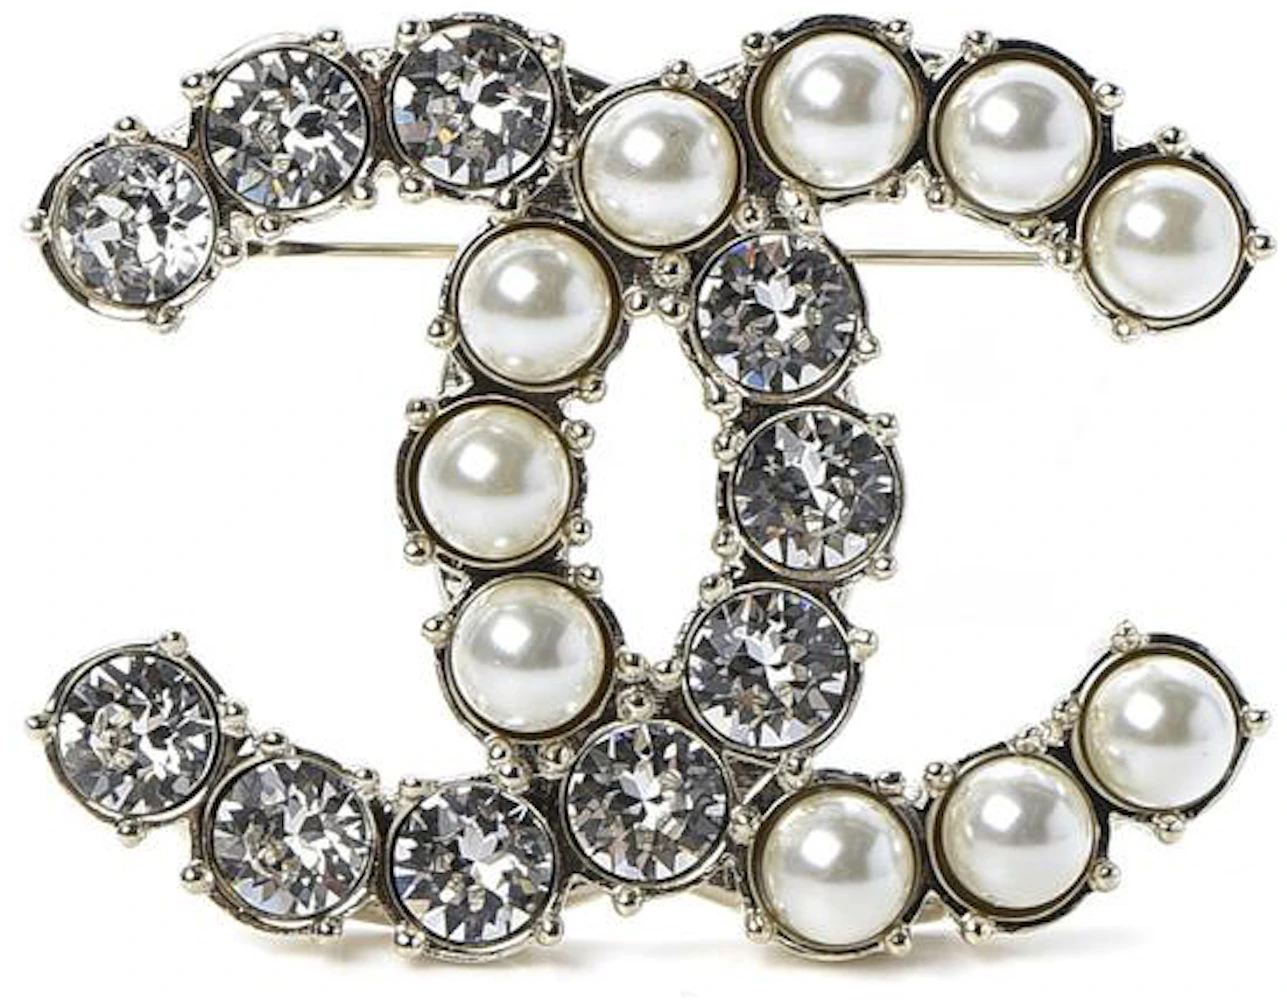 Chanel Crystal Brooch Gold in Gold Metal - US